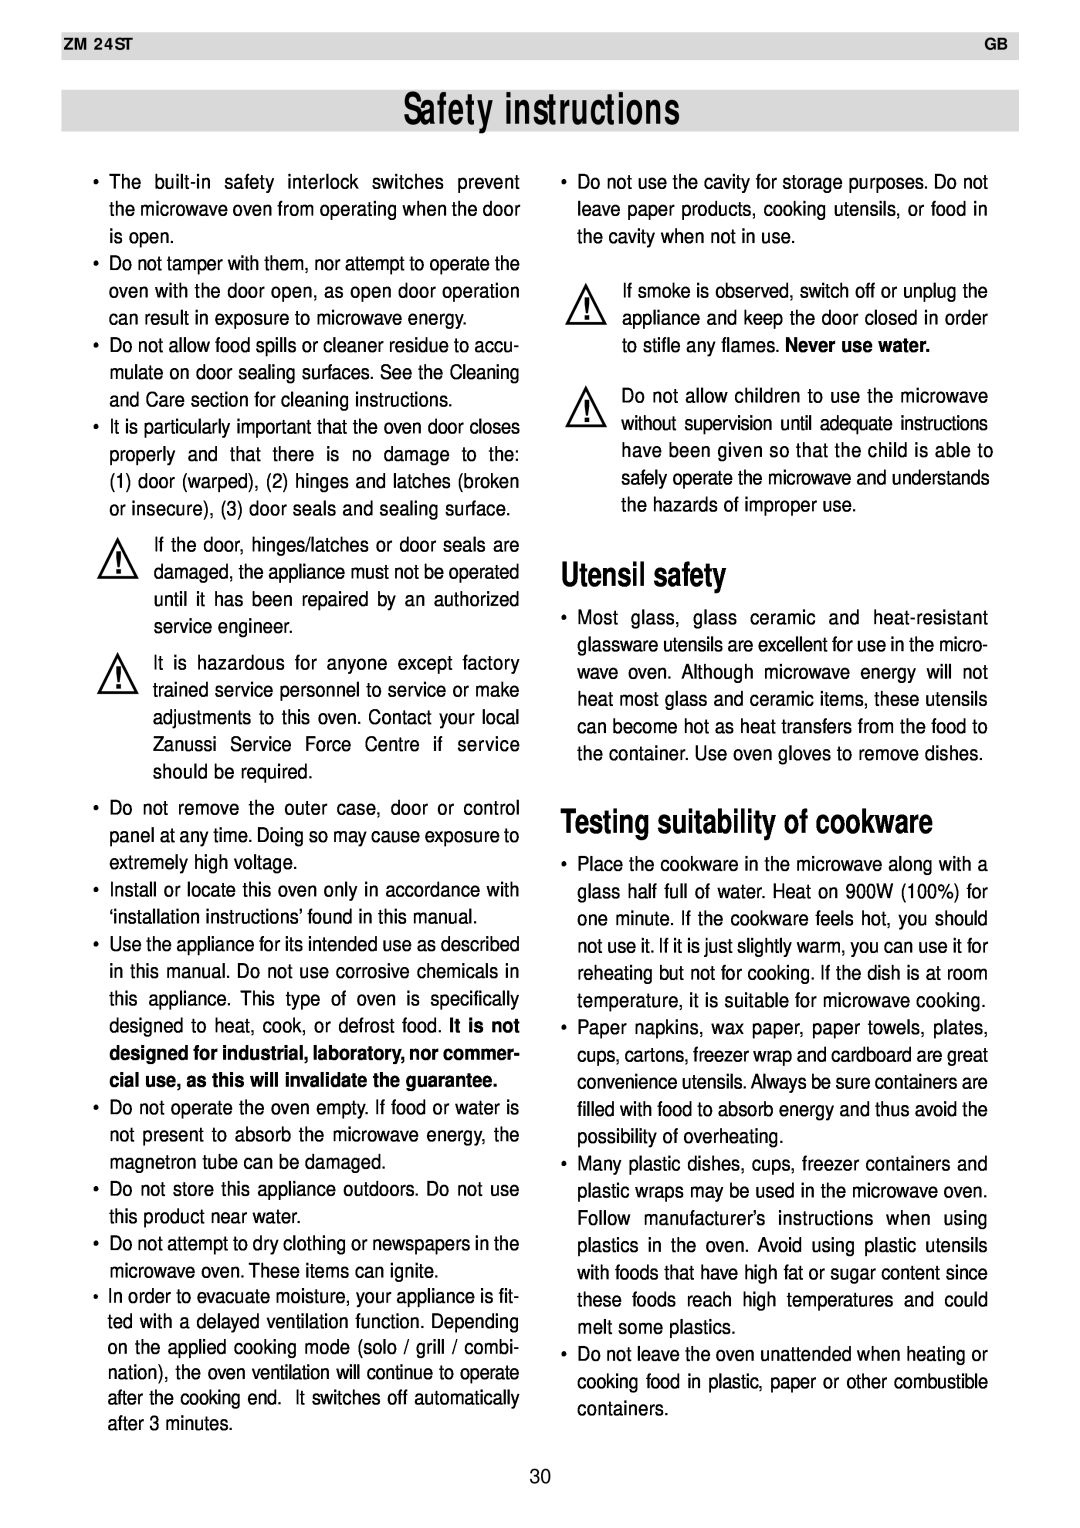 Zanussi AG125 quick start Safety instructions, Utensil safety, Testing suitability of cookware 